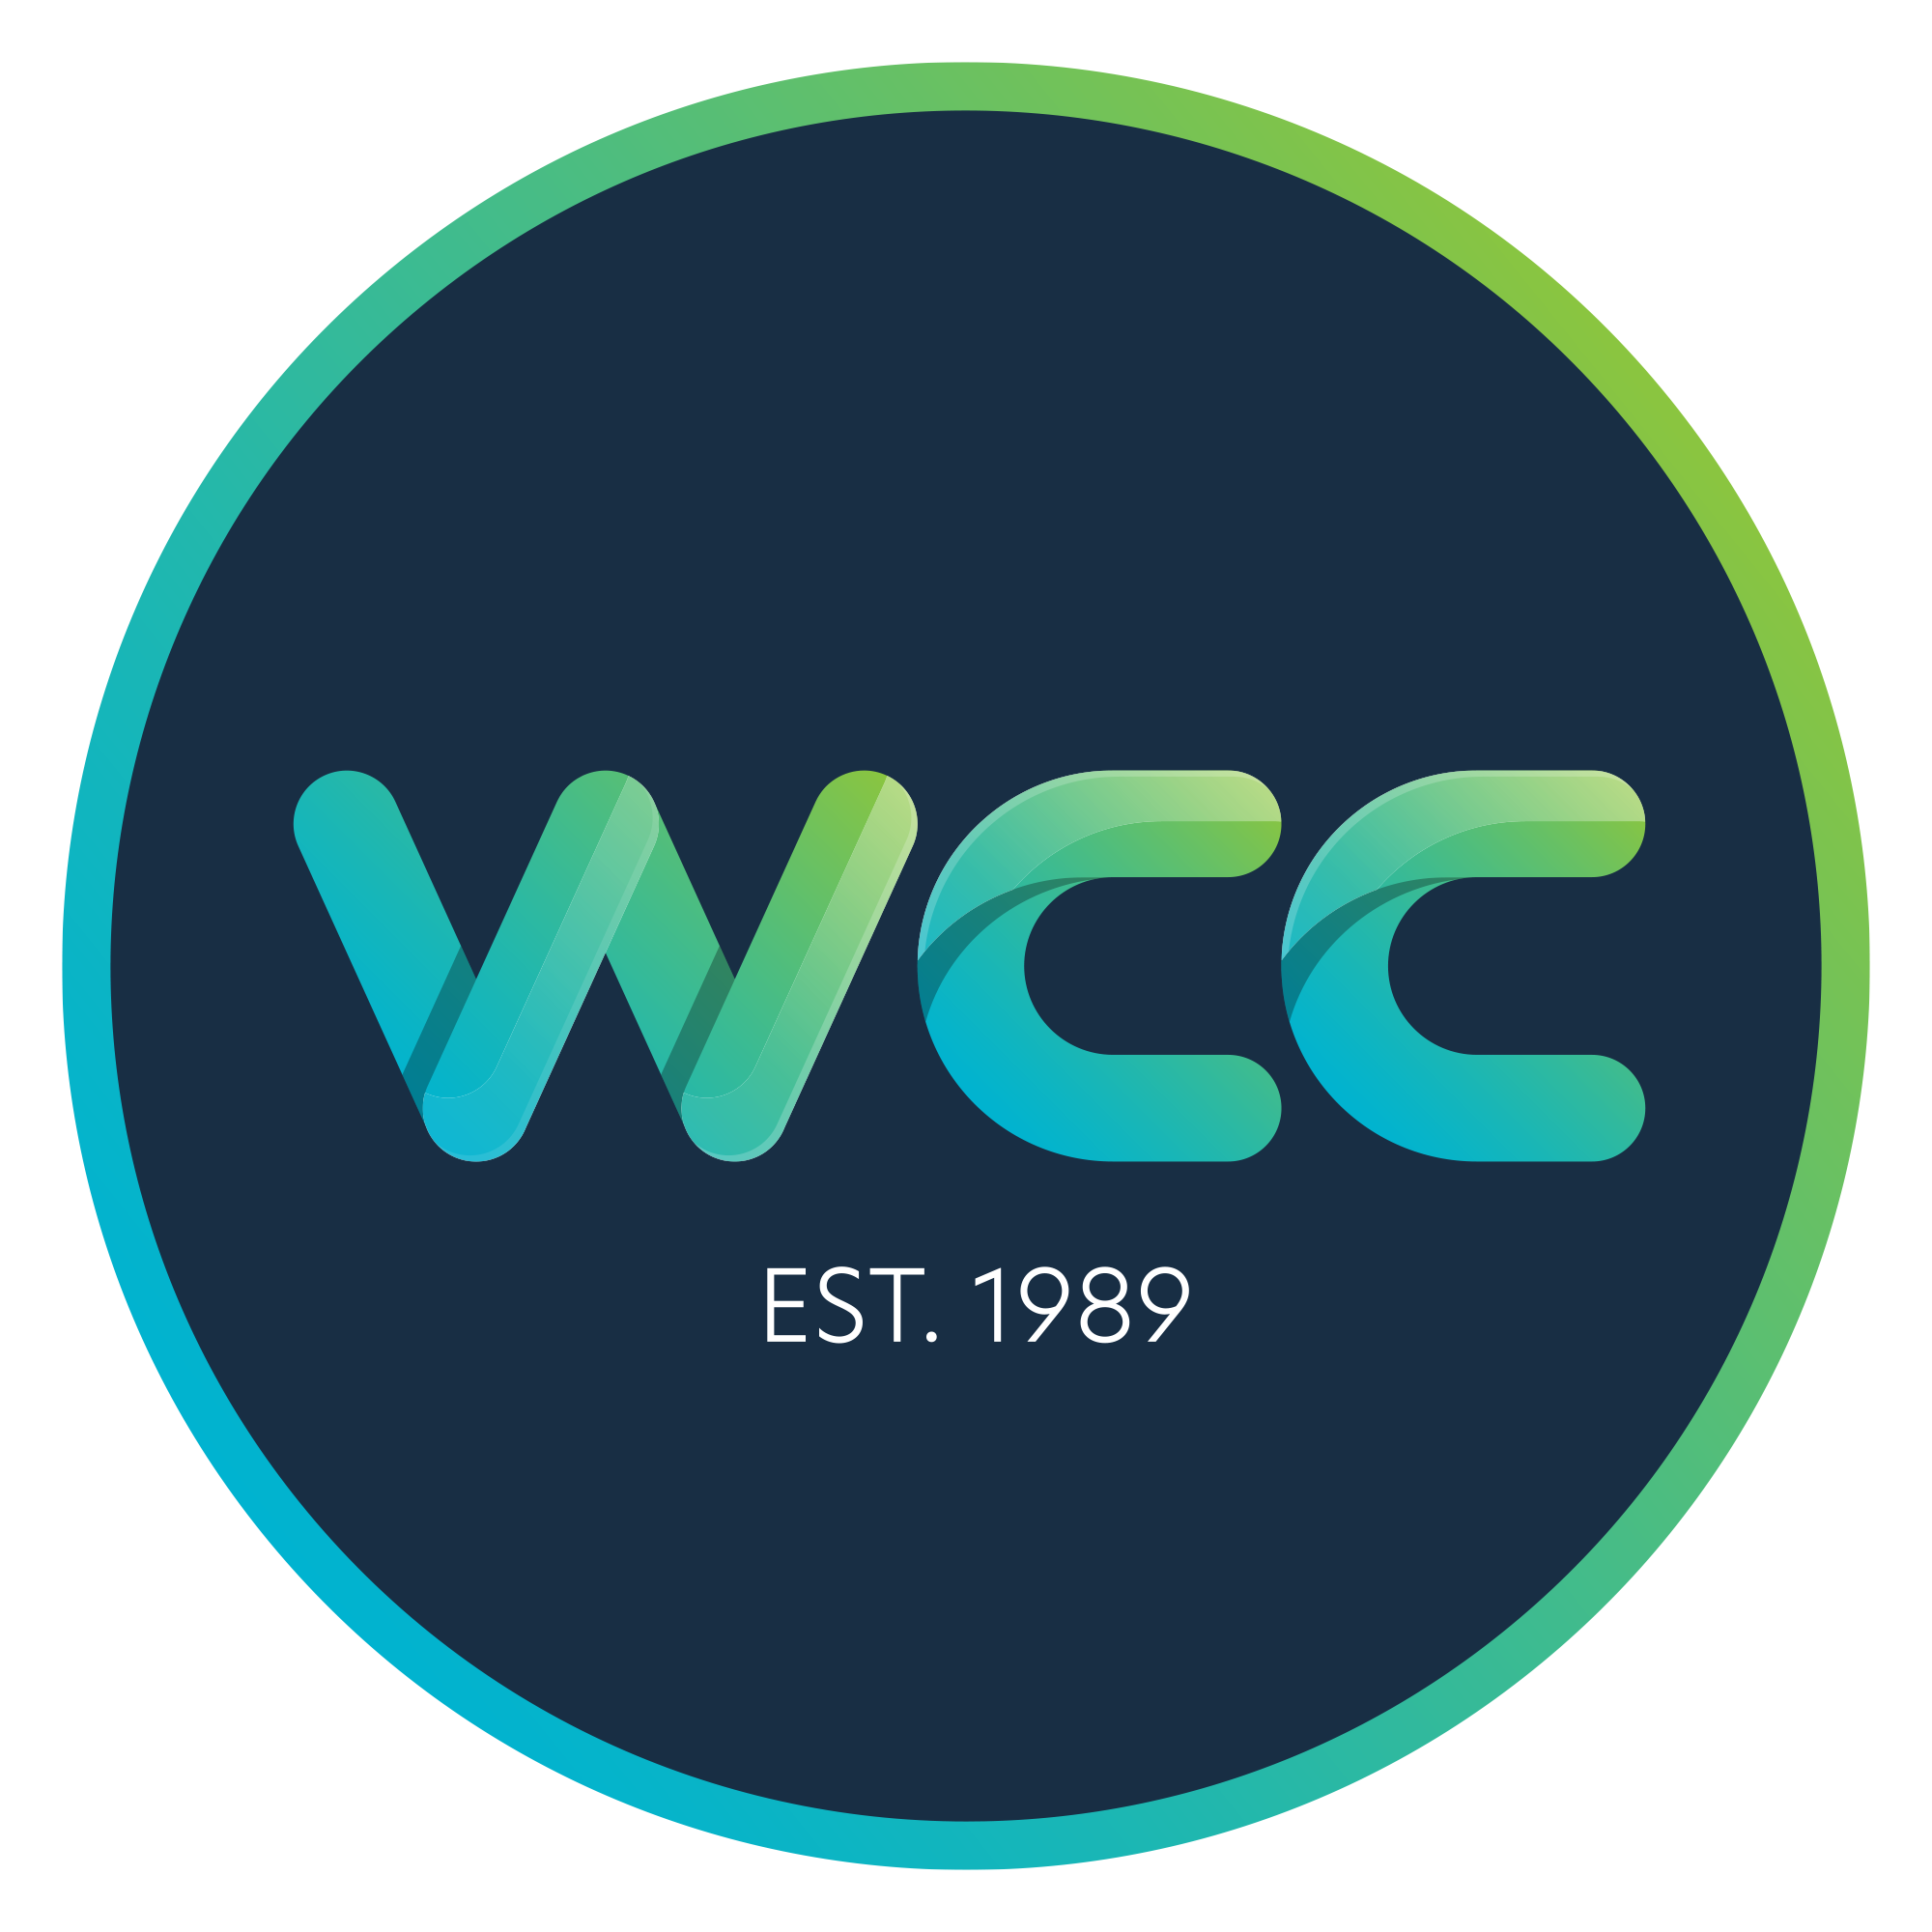 WCC Logo Concept by Neil Ryan on Dribbble